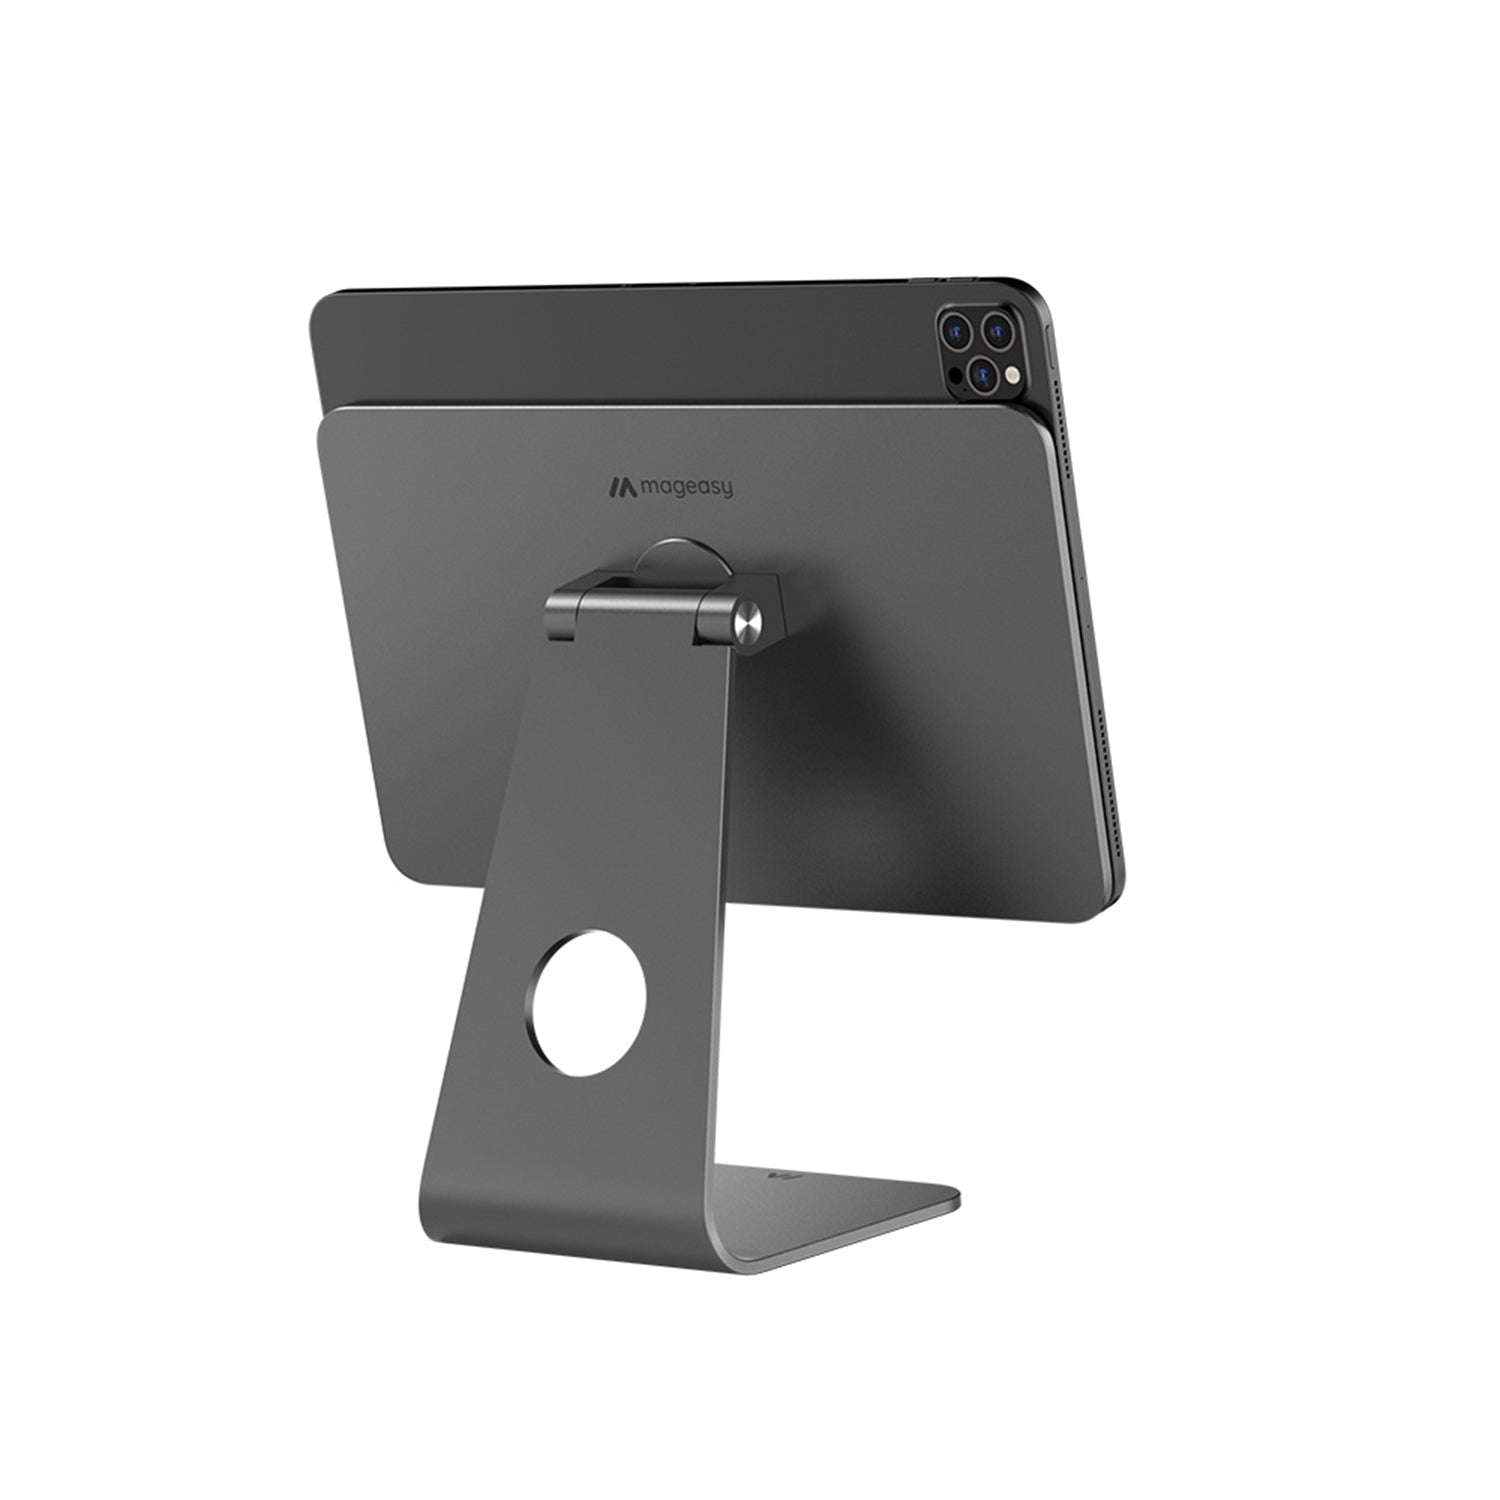 Switcheasy MagMount Magnetic iPad Stand for iPad Pro 12.9" (2021/2018) Default SwitchEasy 